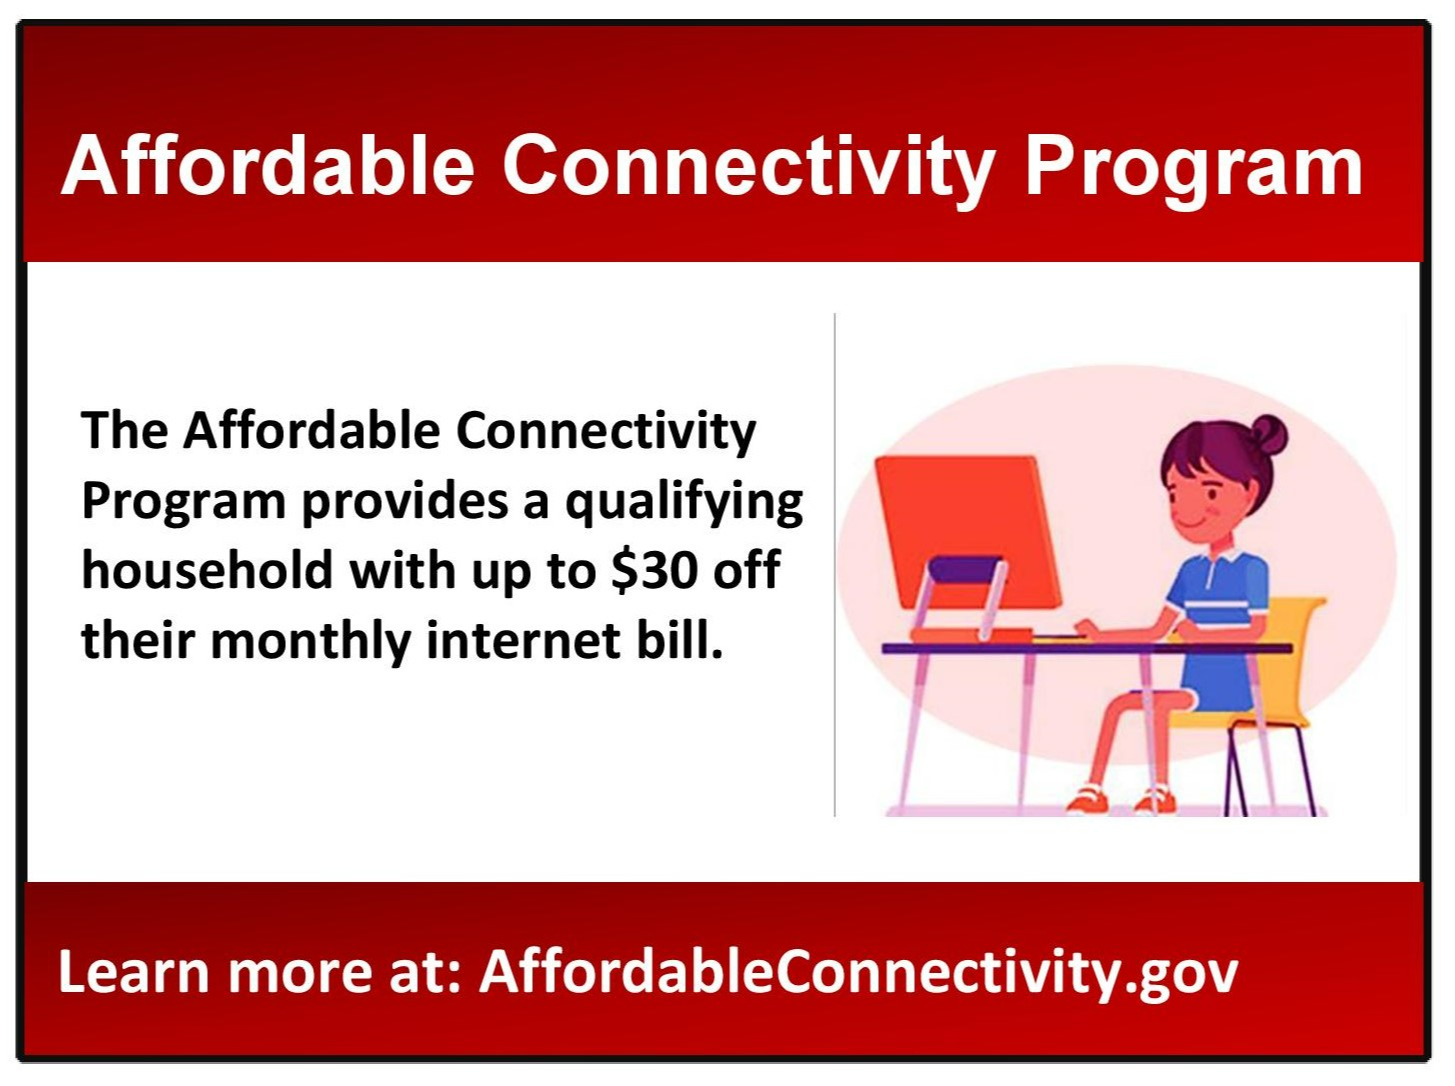 Affordable Connectivity program, save up to $30 a month